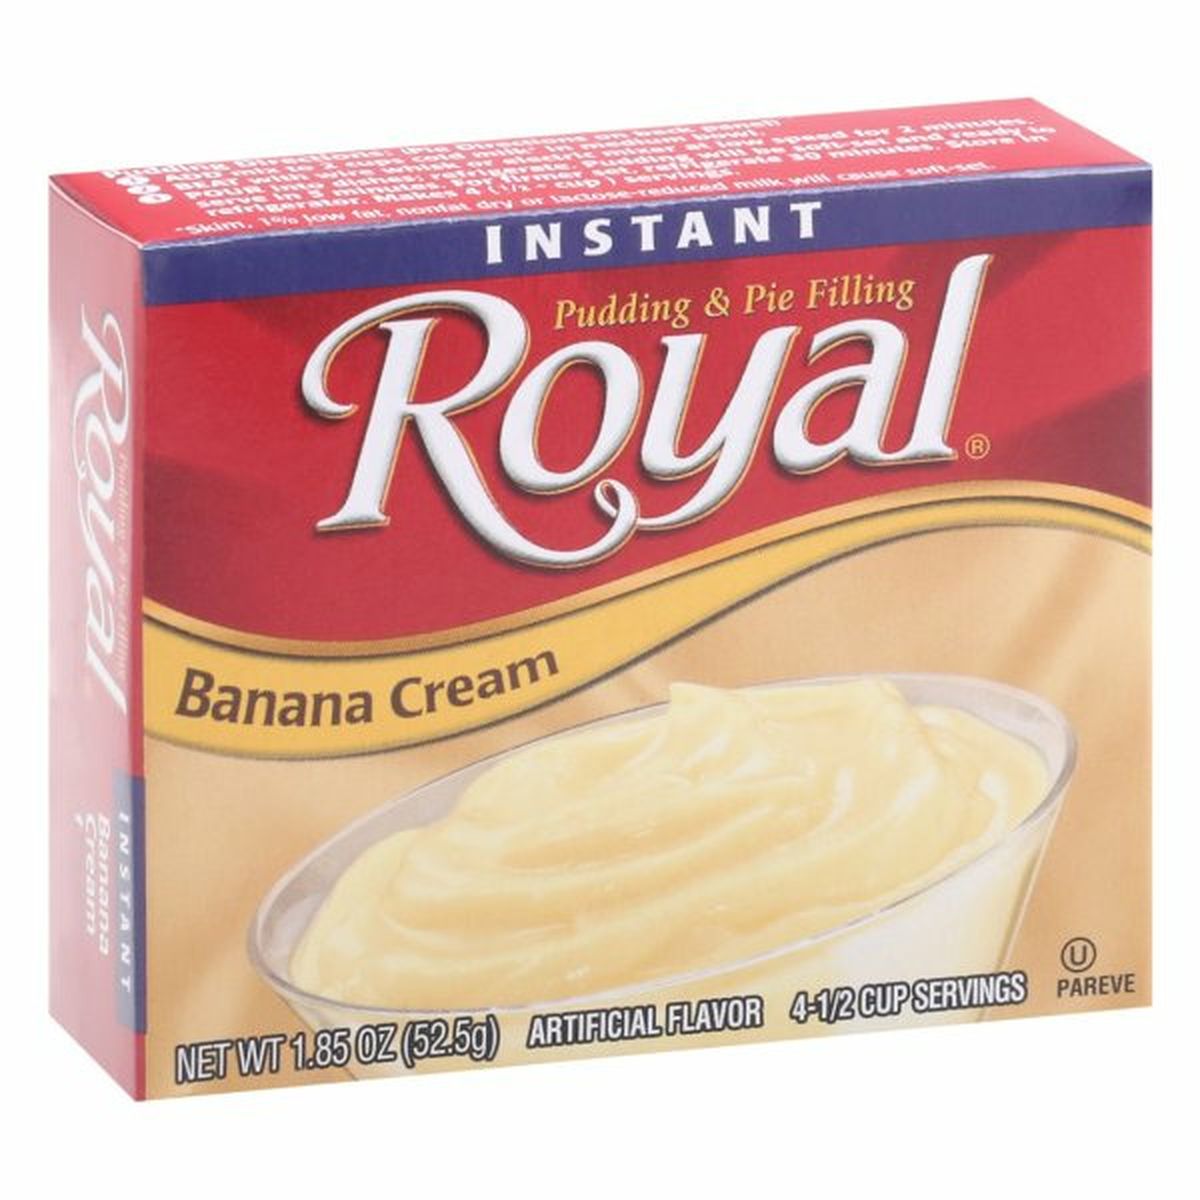 Calories in Royal Pudding & Pie Filling, Banana Cream, Instant